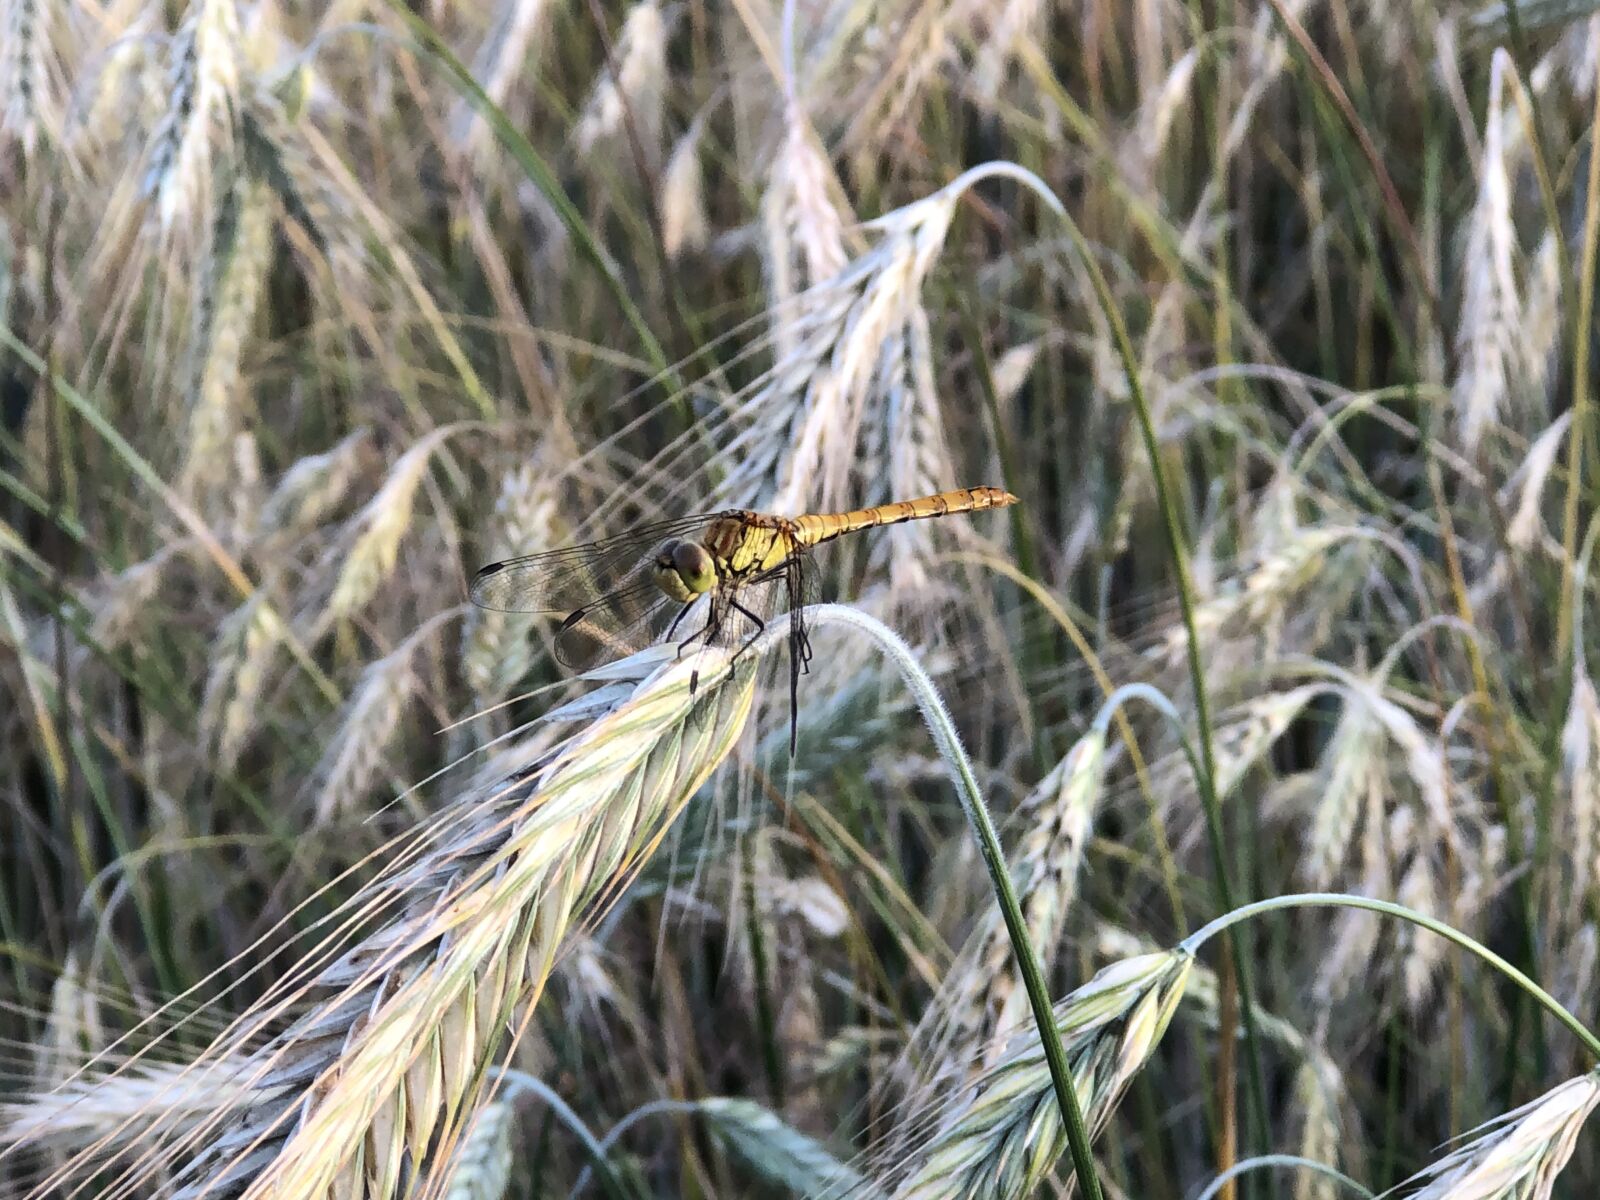 iPhone 8 Plus back dual camera 6.6mm f/2.8 sample photo. Cereals, dragonfly, nature photography